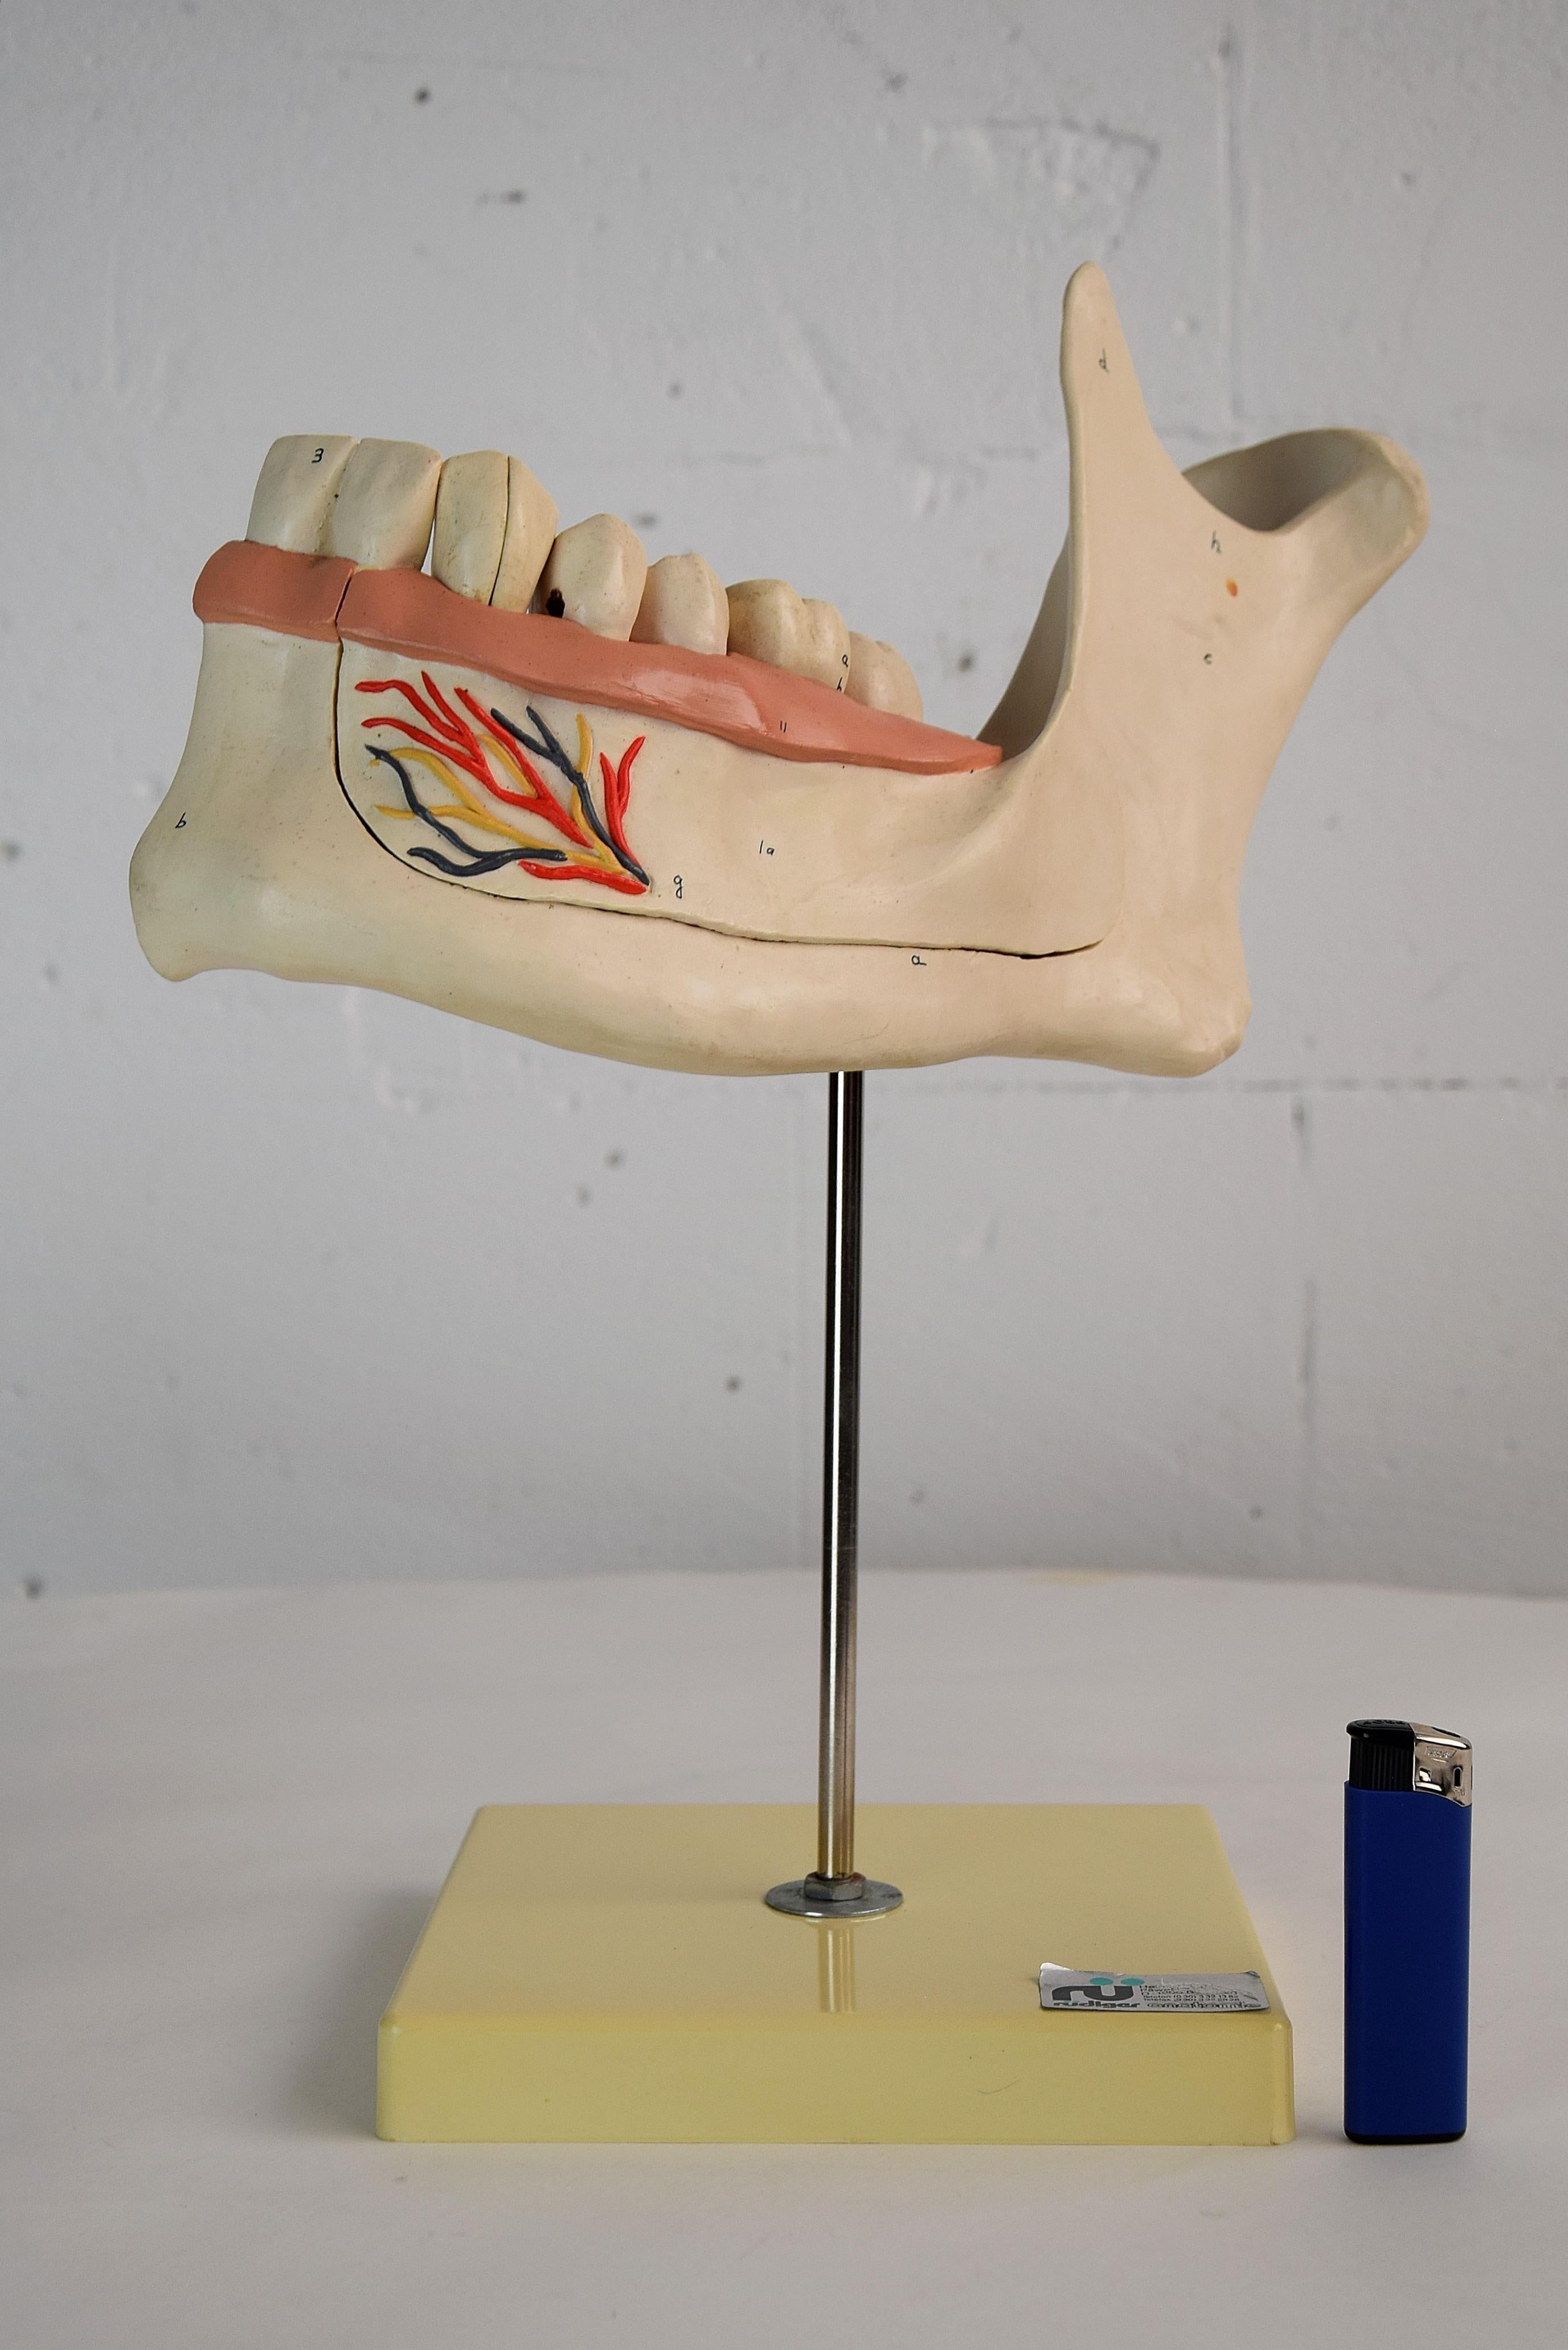 Big 1960s anatomical jaw teaching model in perfect condition. This beautiful resin jaw can be taken apart as shown in the images. It was made in the 1960s by Rudiger Anatomie in Berlin, Western Germany.